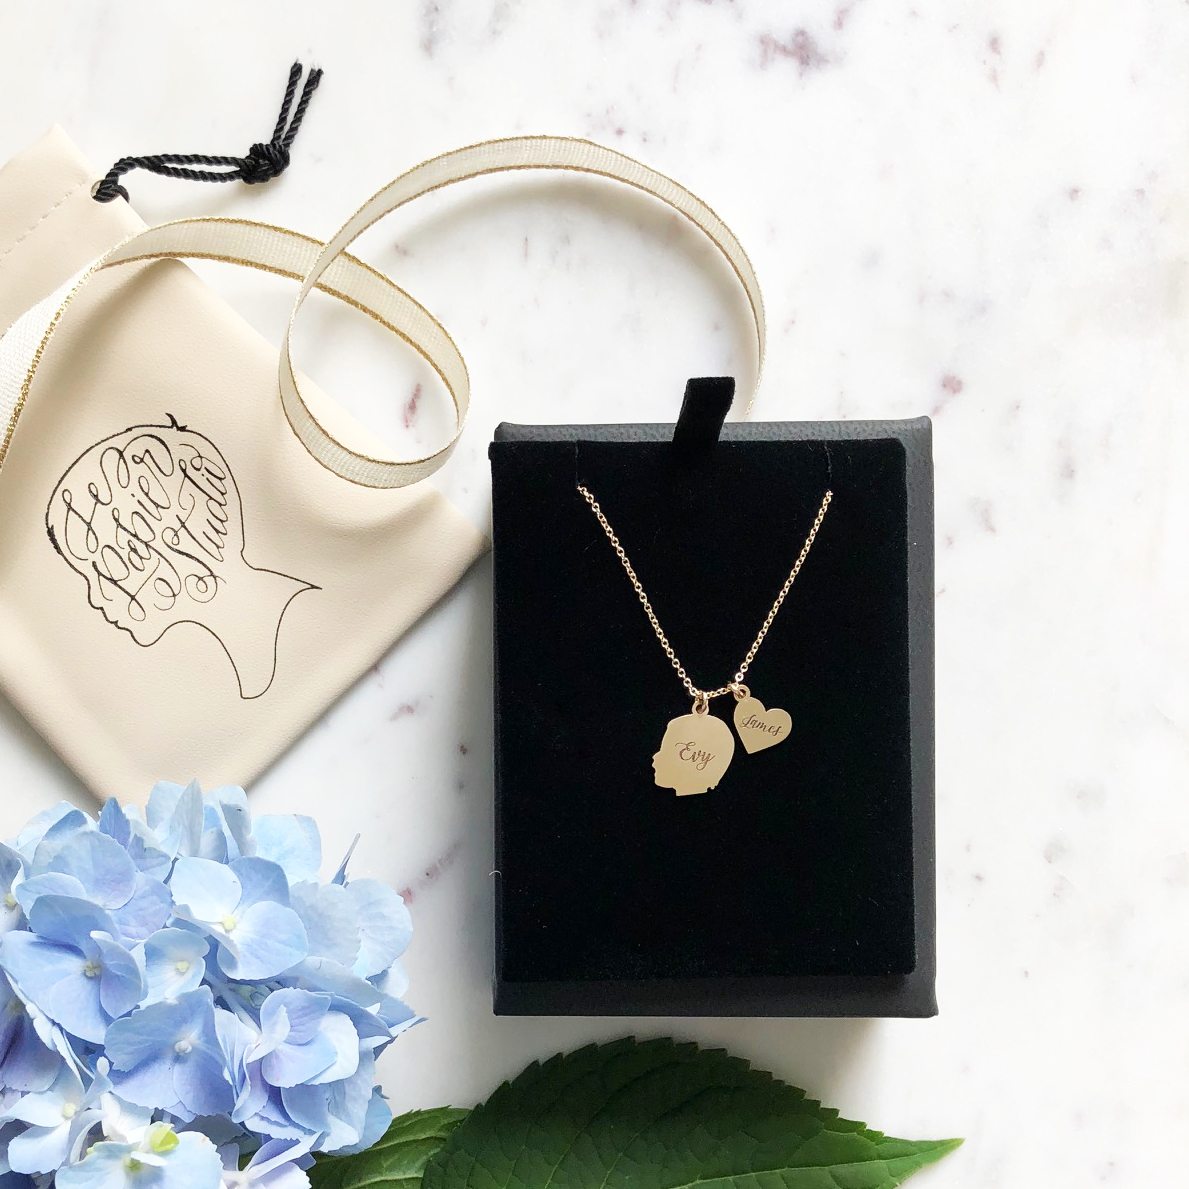 Le Paperie, Collection of jewelry for miscarriage or infant loss. The Morning: A community of hope for women finding joy after pregnancy or infant loss.